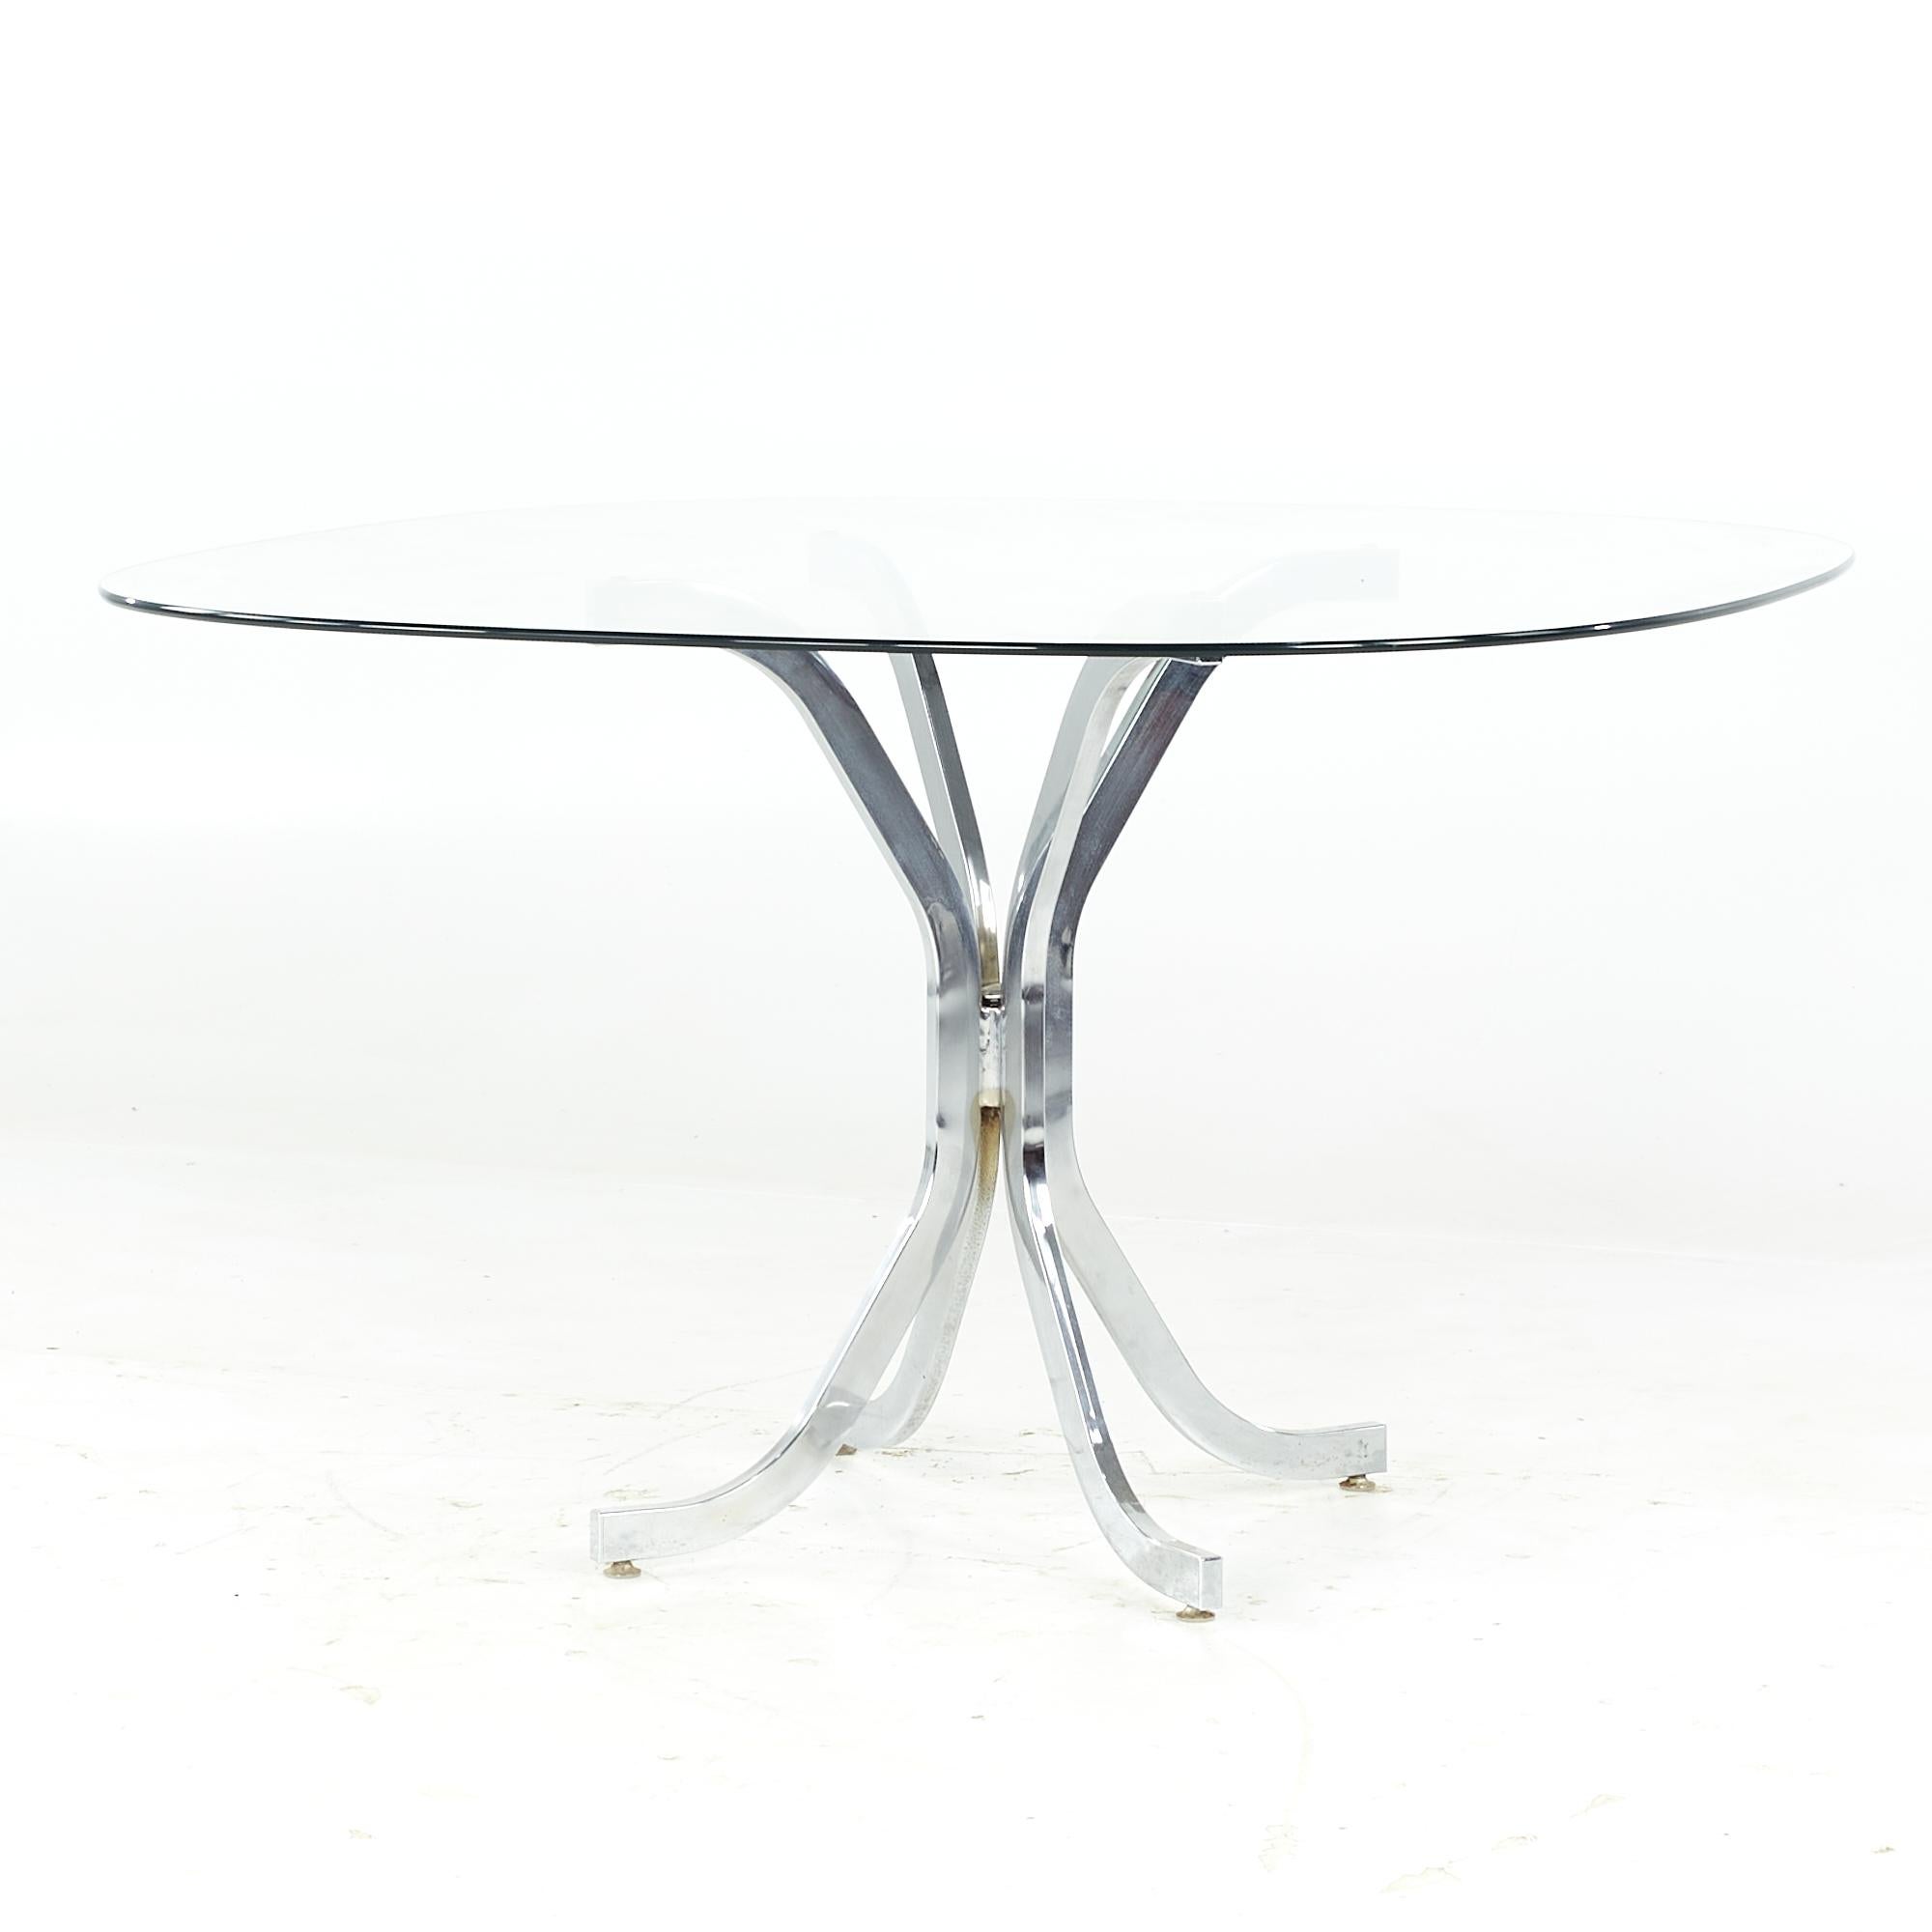 Mid-Century Modern Milo Baughman Style Midcentury Glass and Chrome Dining Room Table For Sale